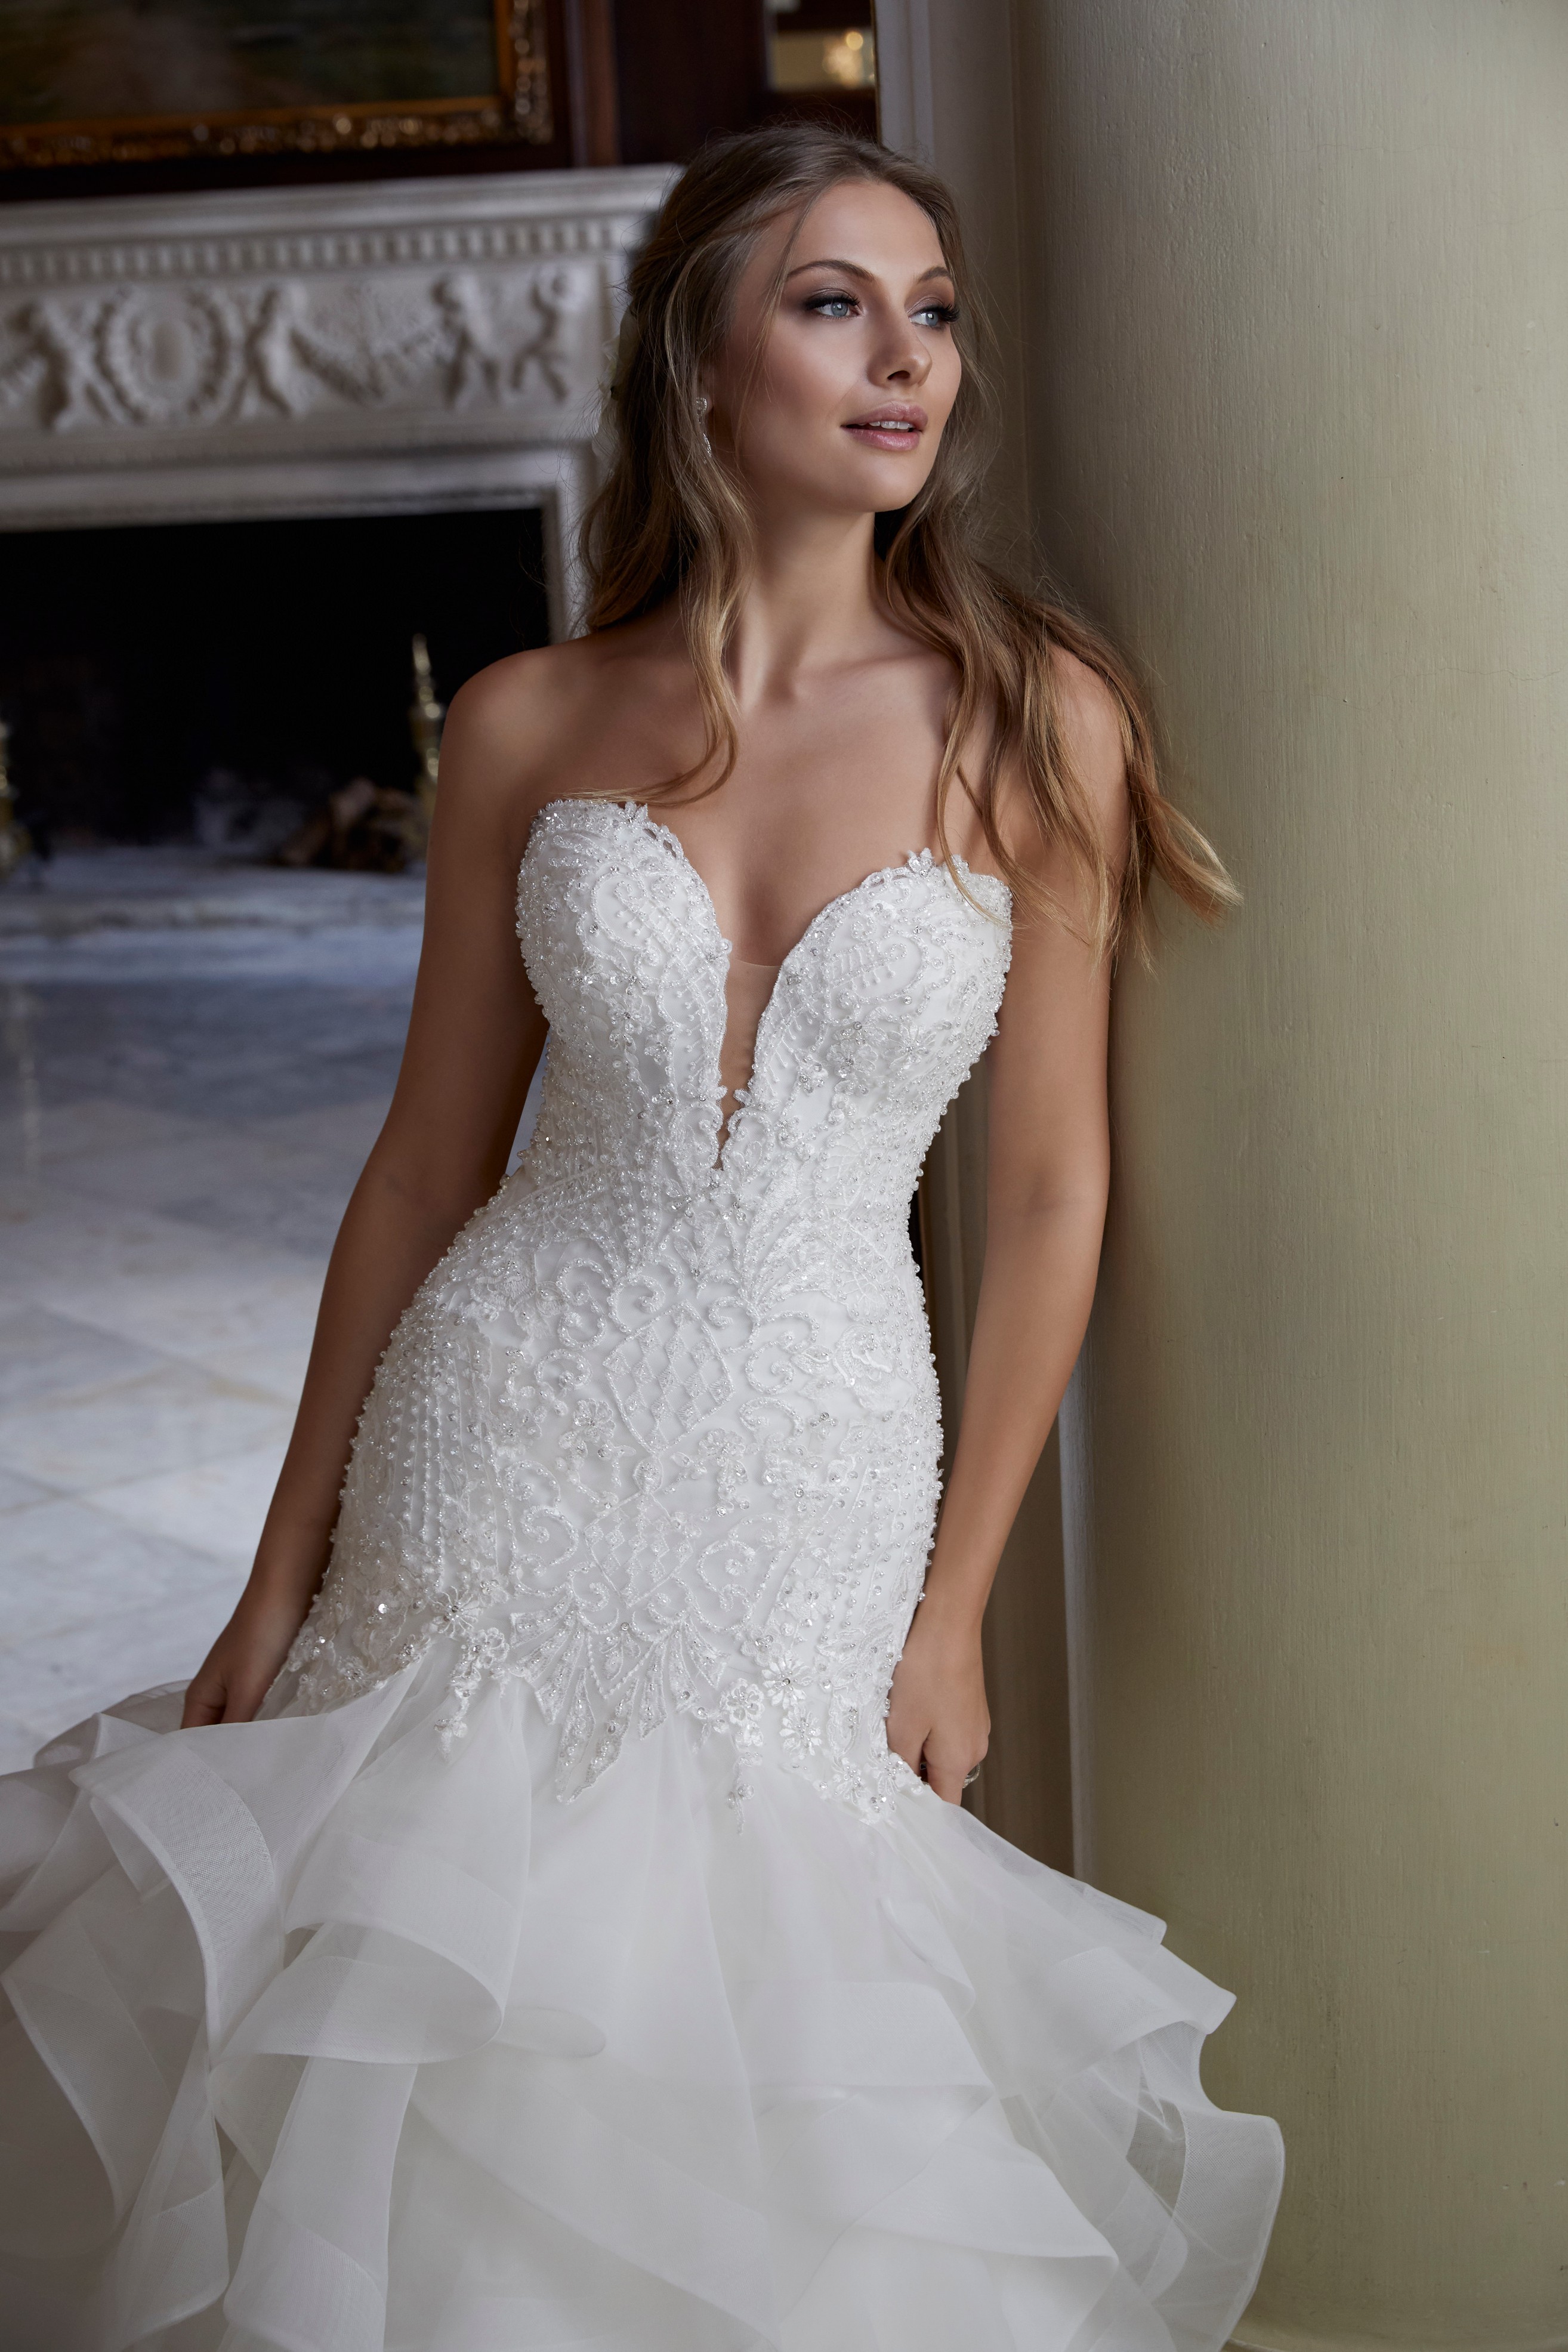 Model wearing one of our Ronald Joyce hot wedding dress trends, Didima (style 69587) – a fishtail dress with a ruffle skirt and beaded plunge bodice in ivory.